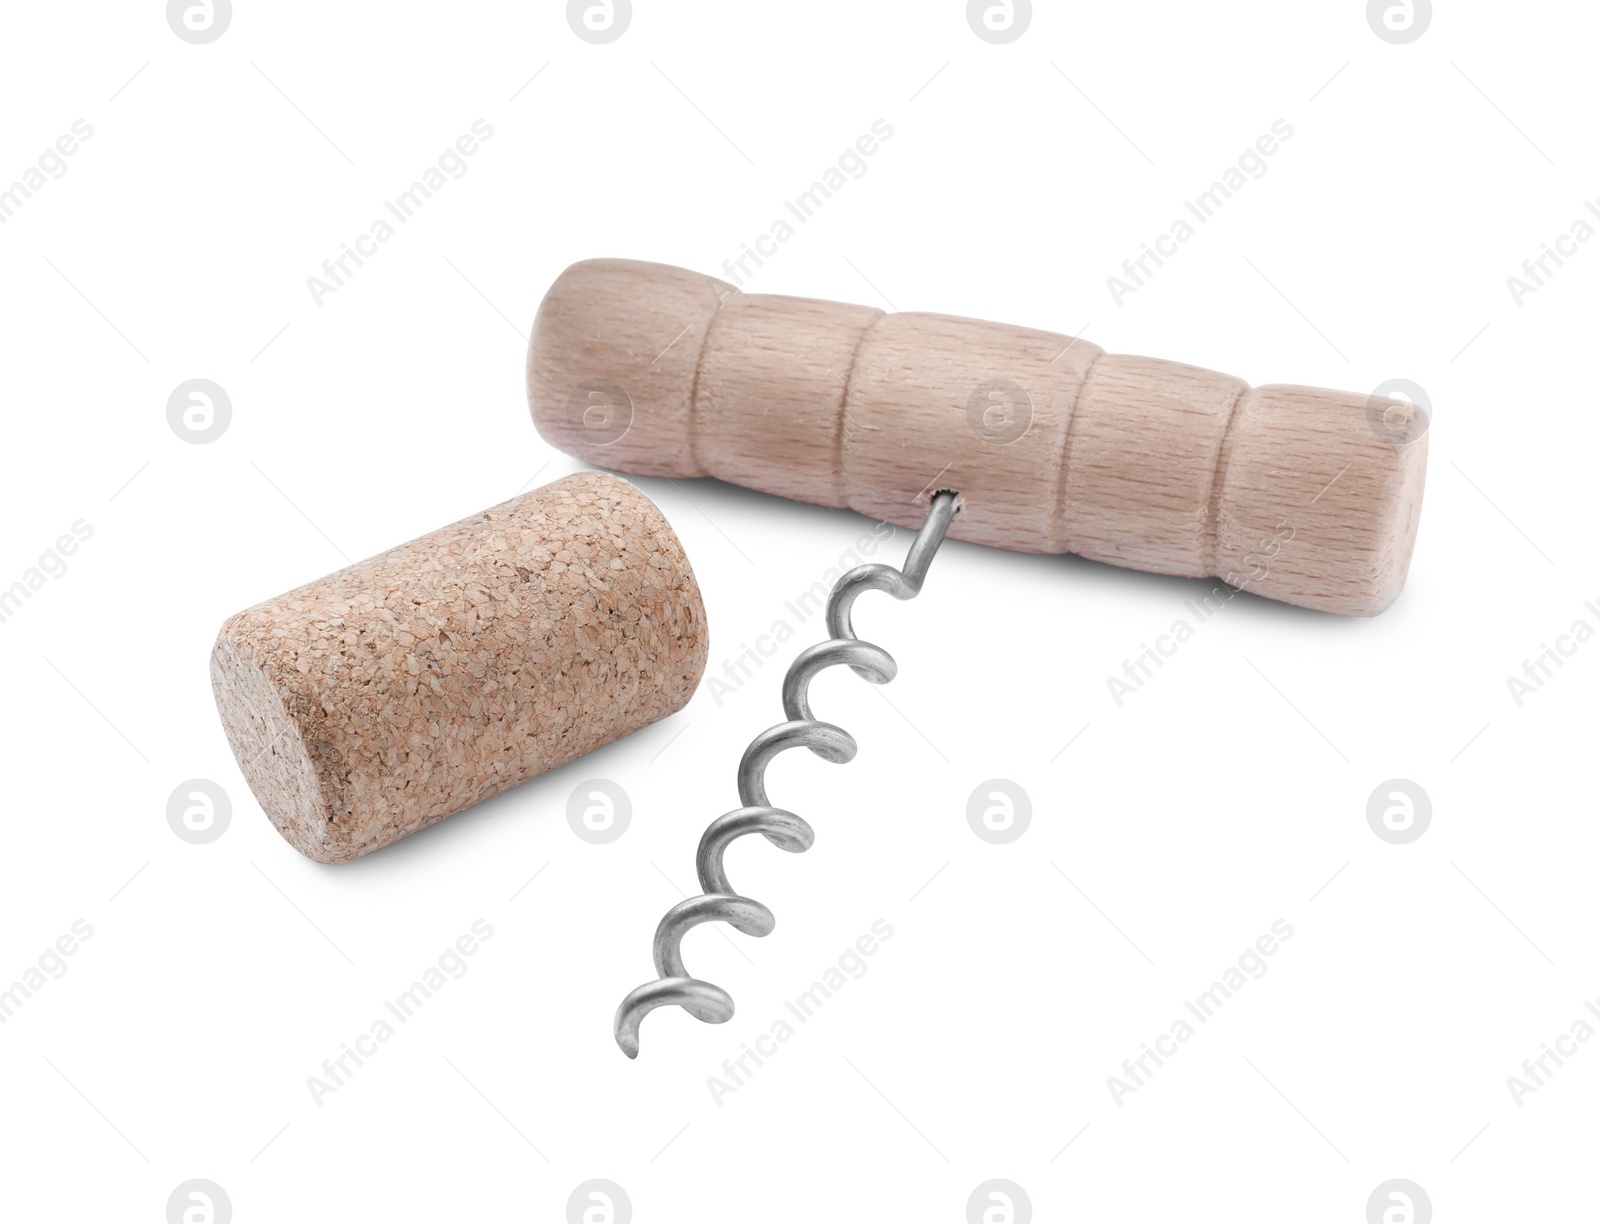 Photo of Corkscrew and wine bottle stopper on white background